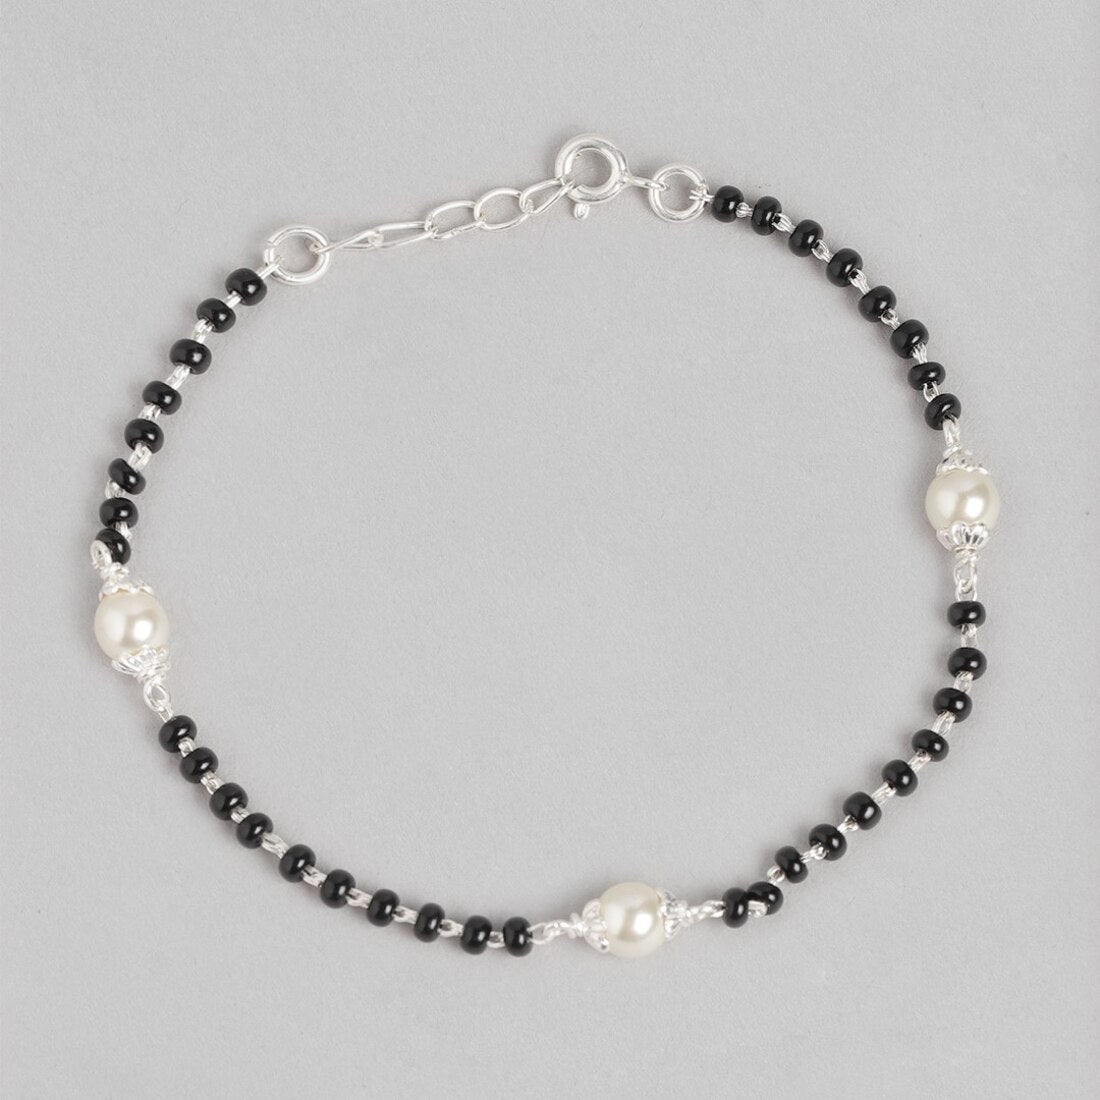 Elegant Harmony 925 Sterling Silver Bracelet with Bead and Pearl Accent